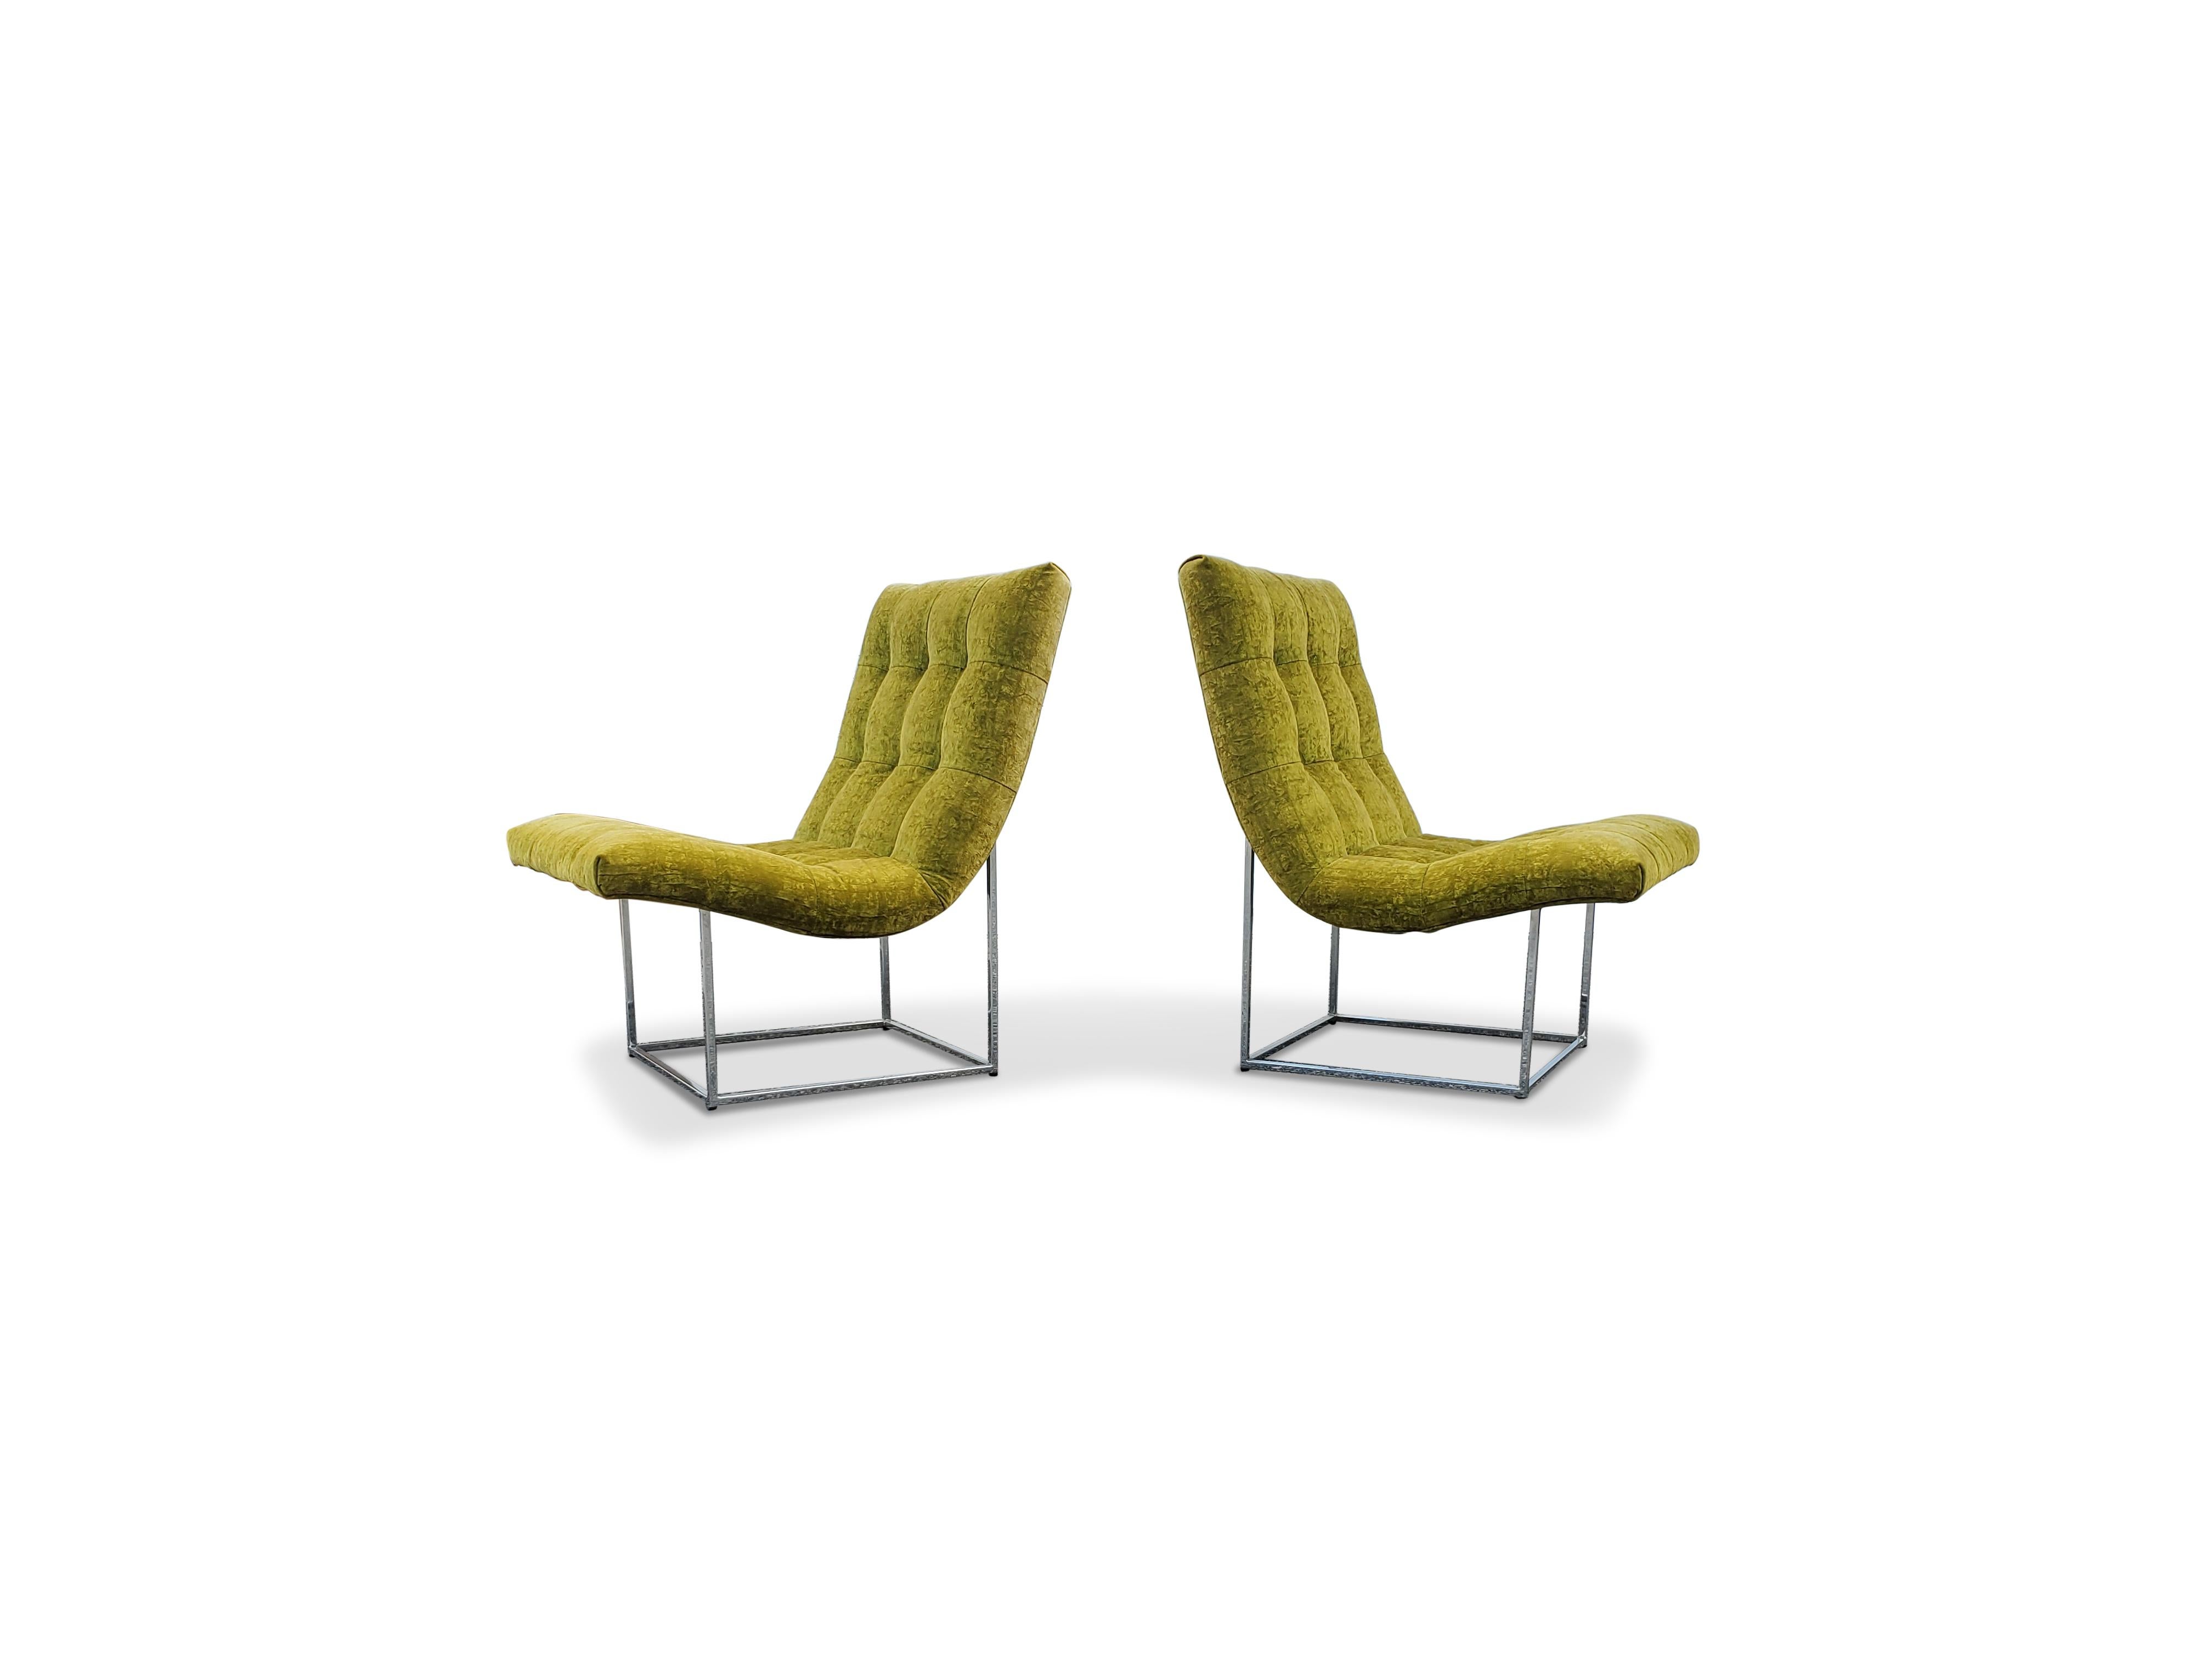 Pair of Milo Baughman for Thayer Coggin scoop lounge chairs.